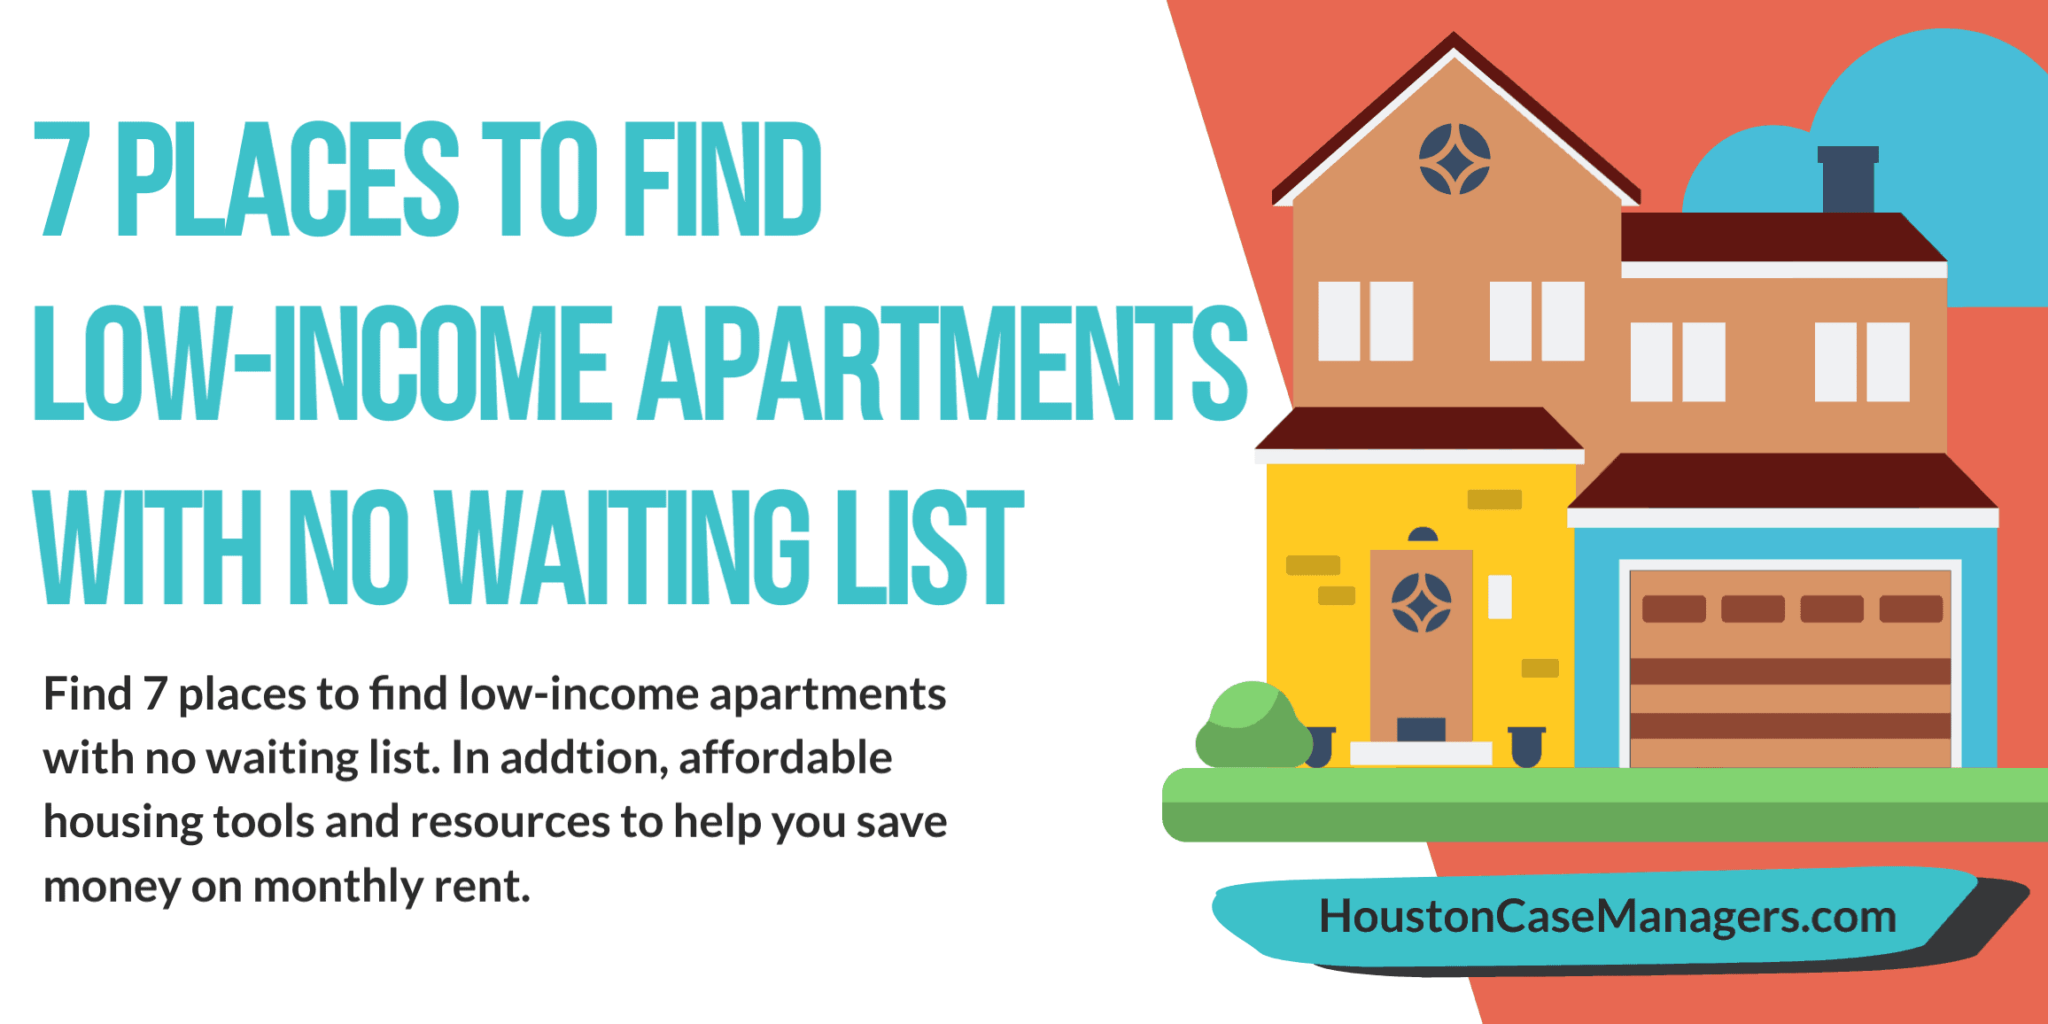 Housing With No Waiting List (7 Ways To Find Housing)